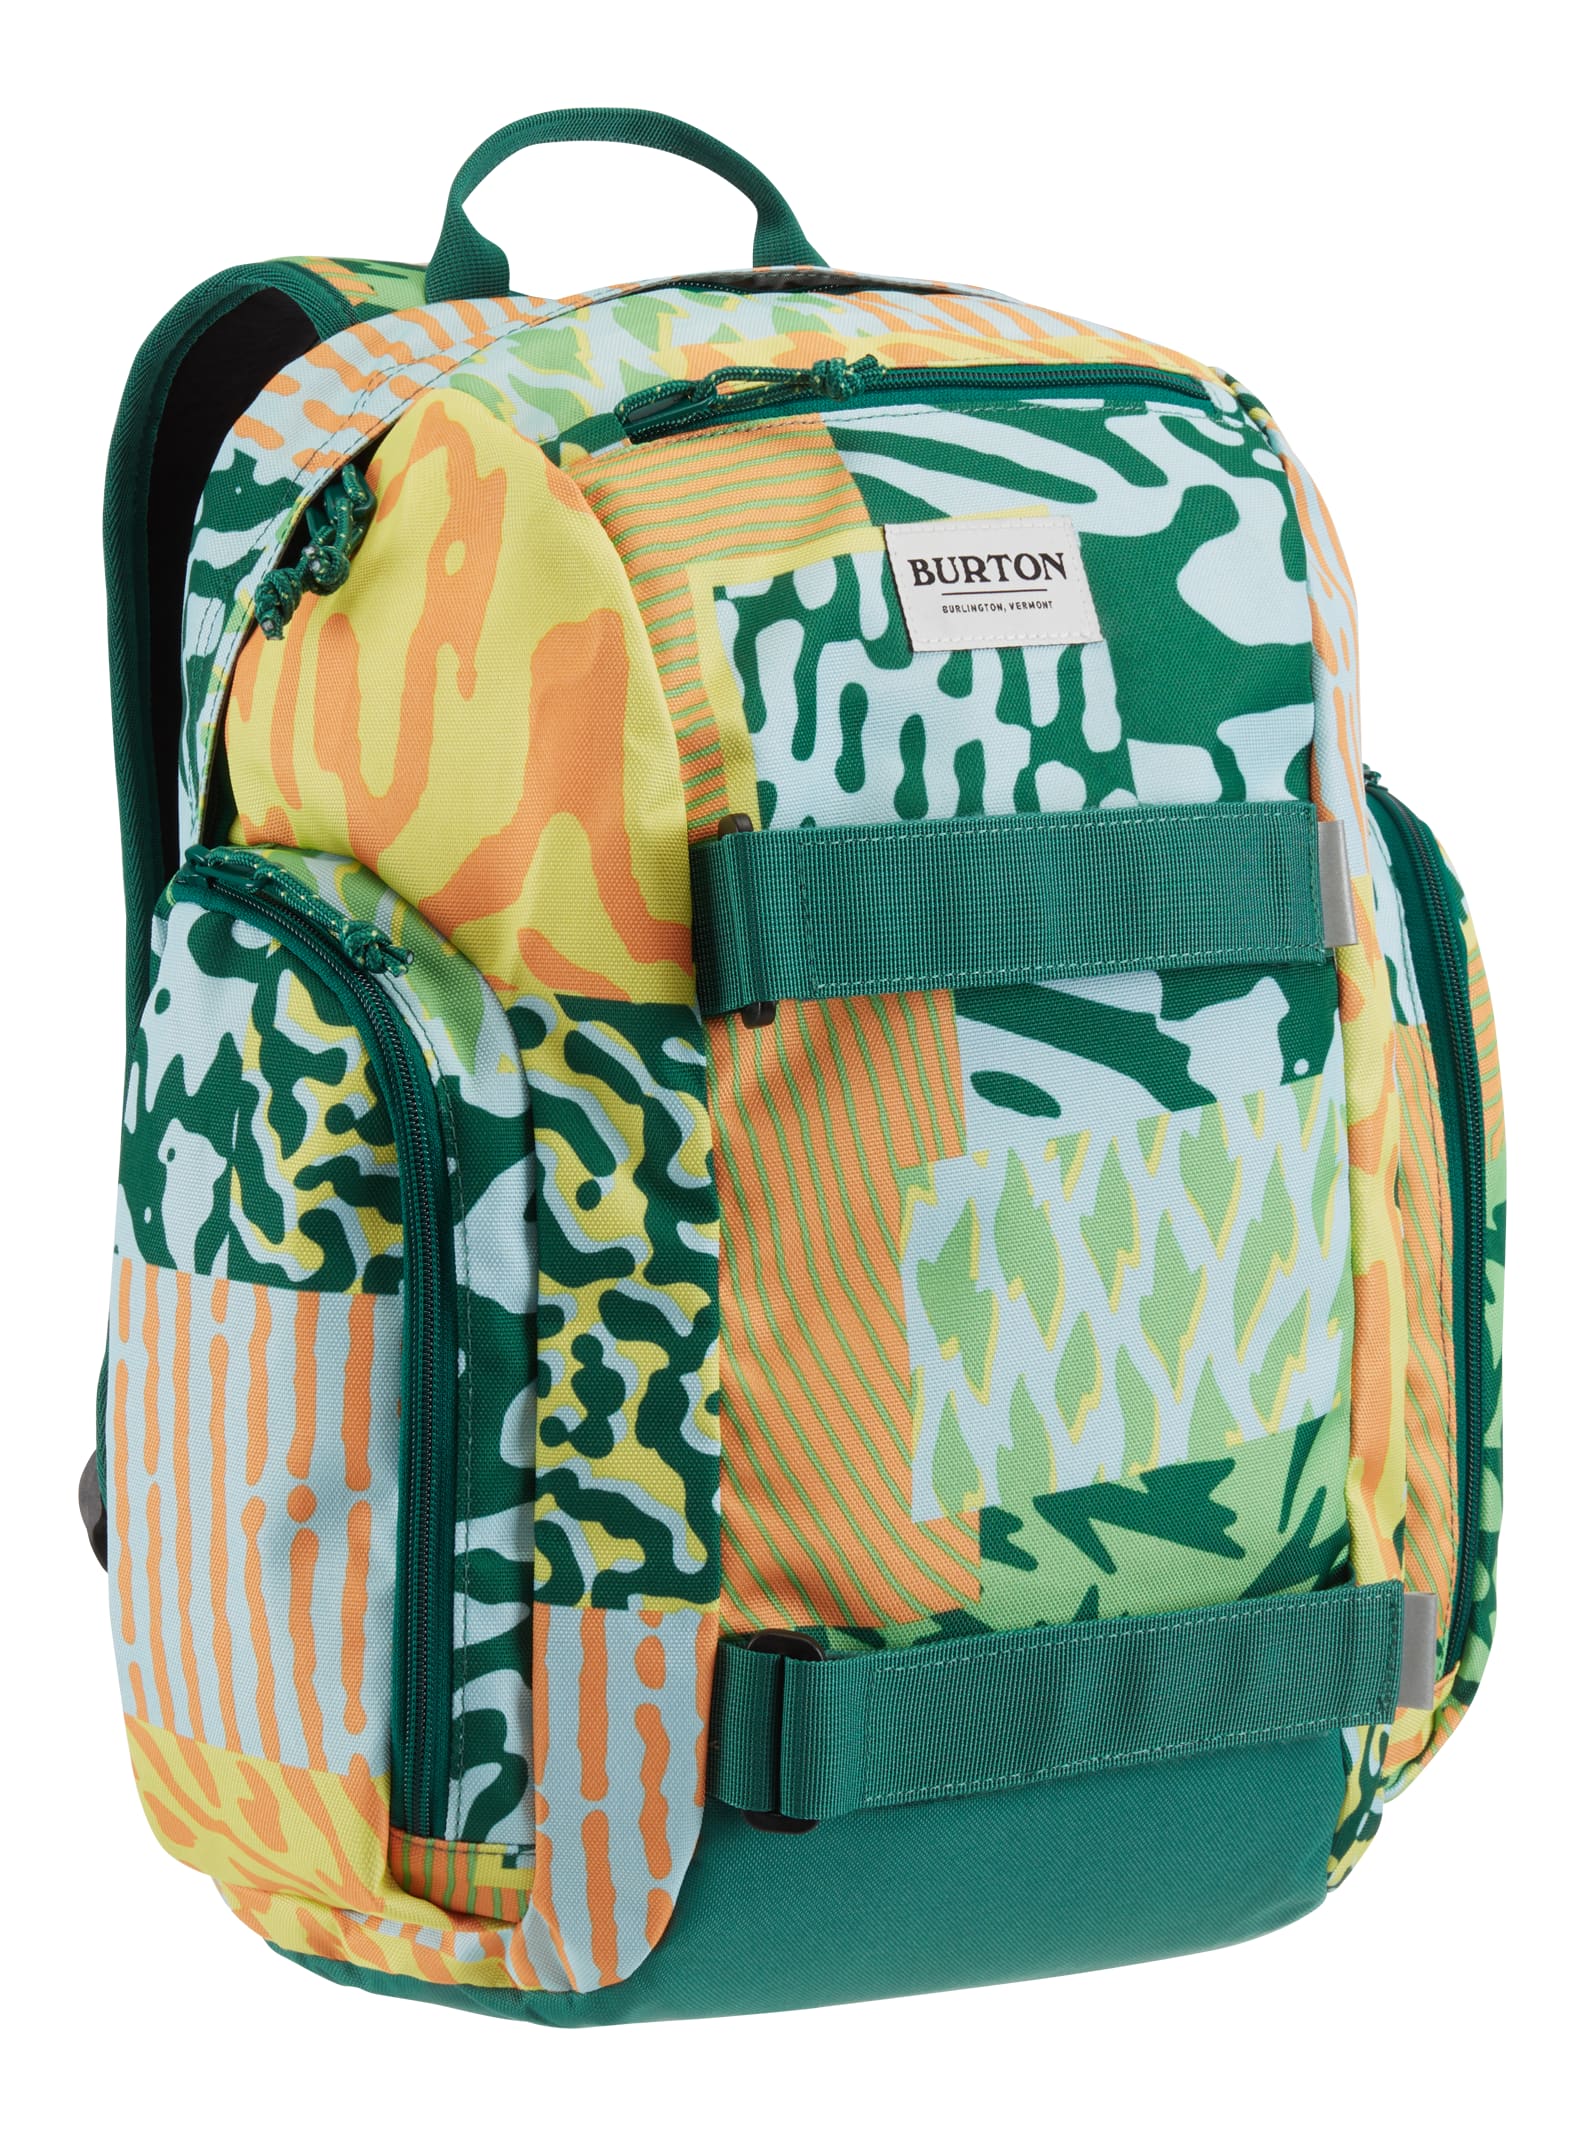 BURTON YOUTH EMPHASIS BACKPACK SIZE: 18 LITERS COLOR: SURFSTRP BRAND NEW! 